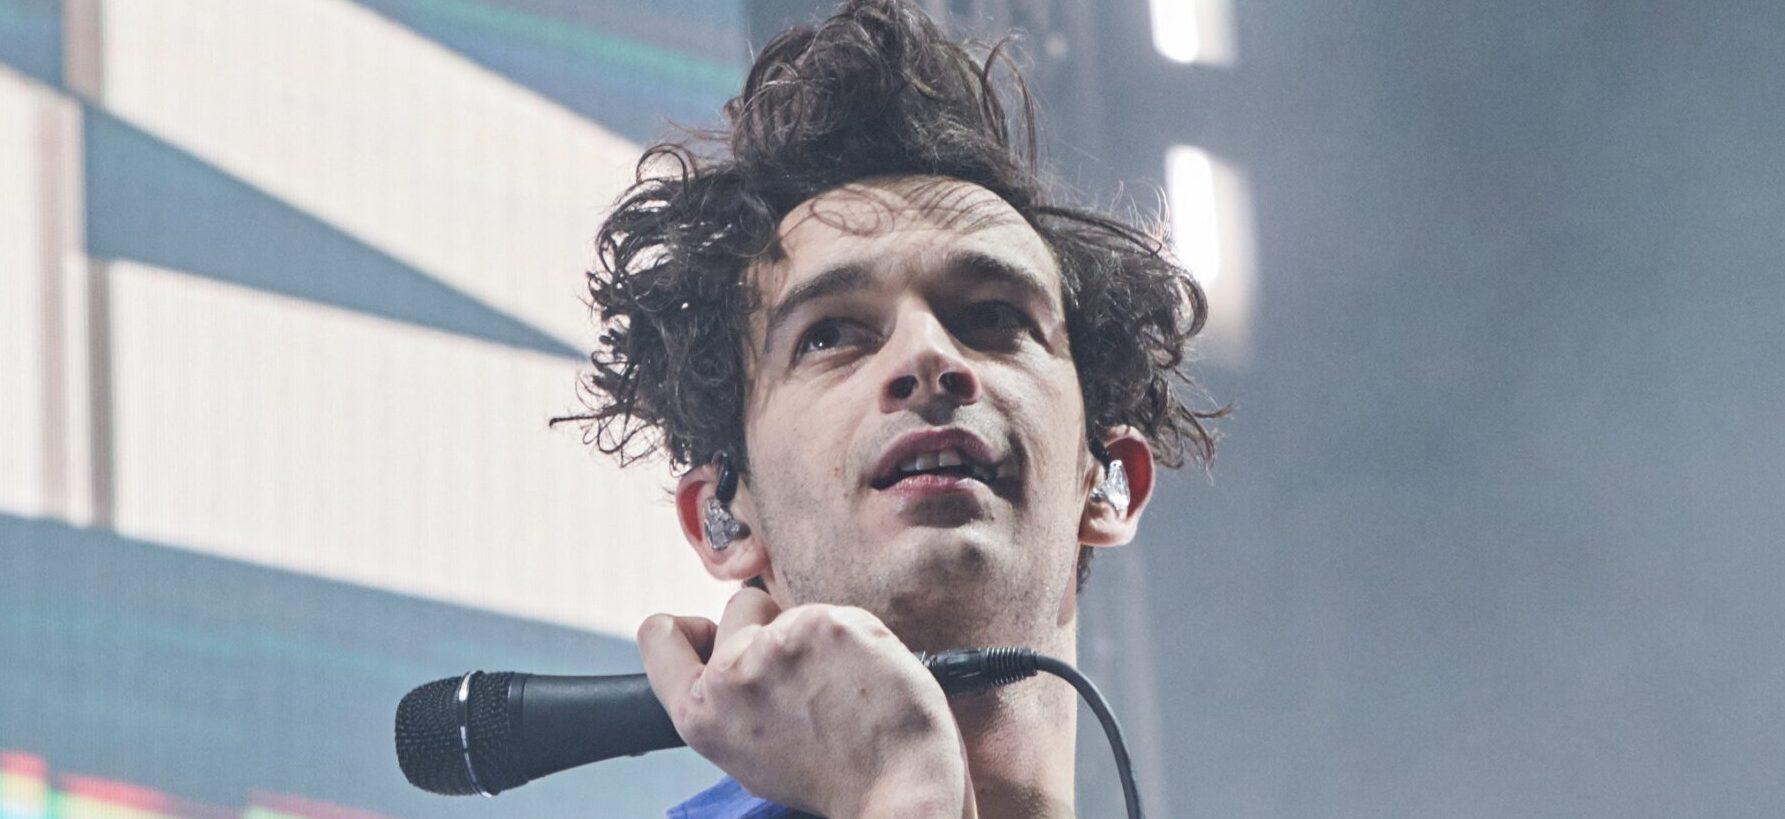 Fans React As Matty Healy Doubles Down On Apology, ‘Pledge To Do Better’